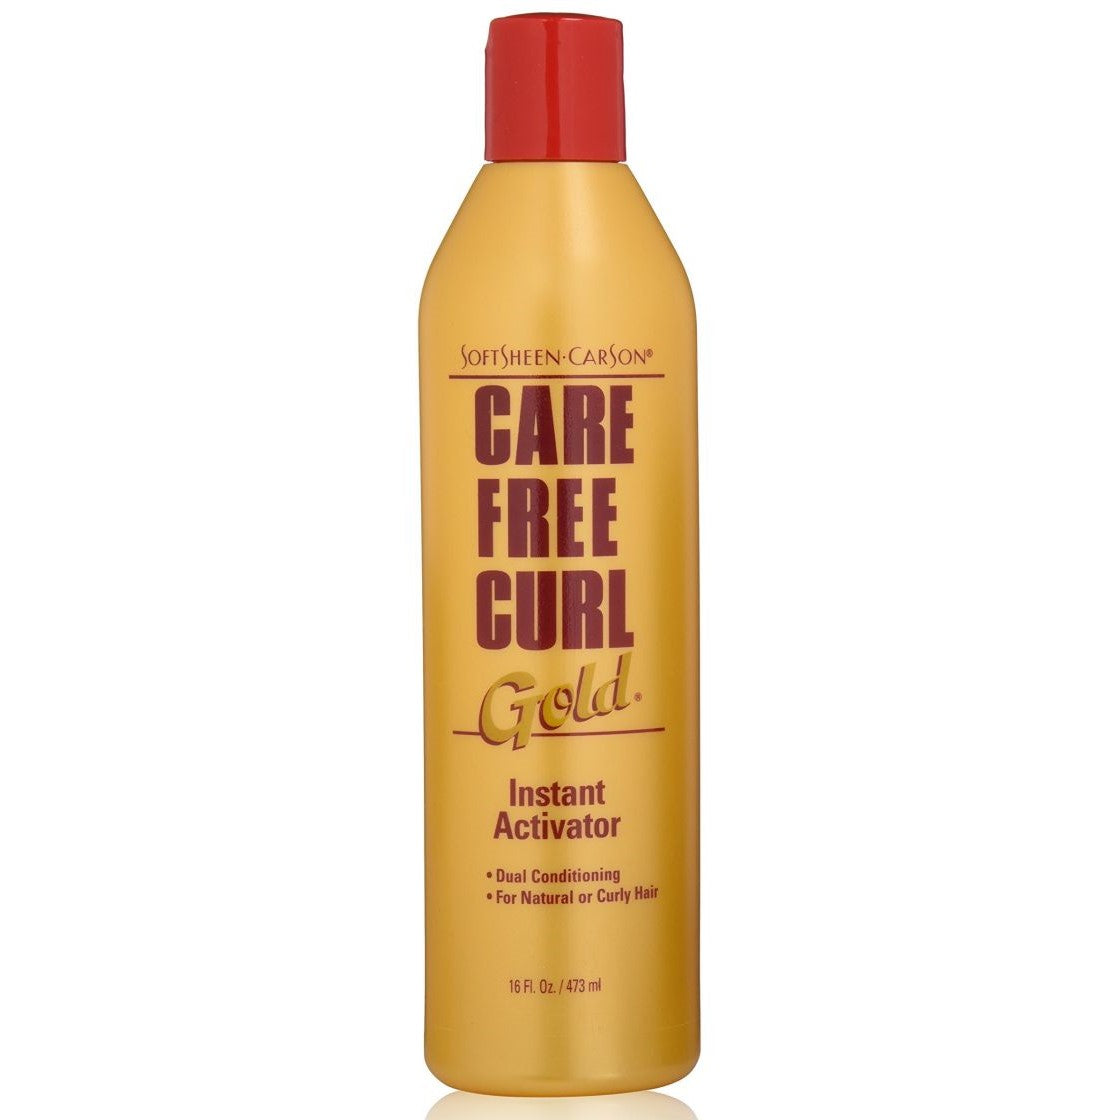 Care Free Curl Gold Instant Activator 473 ml